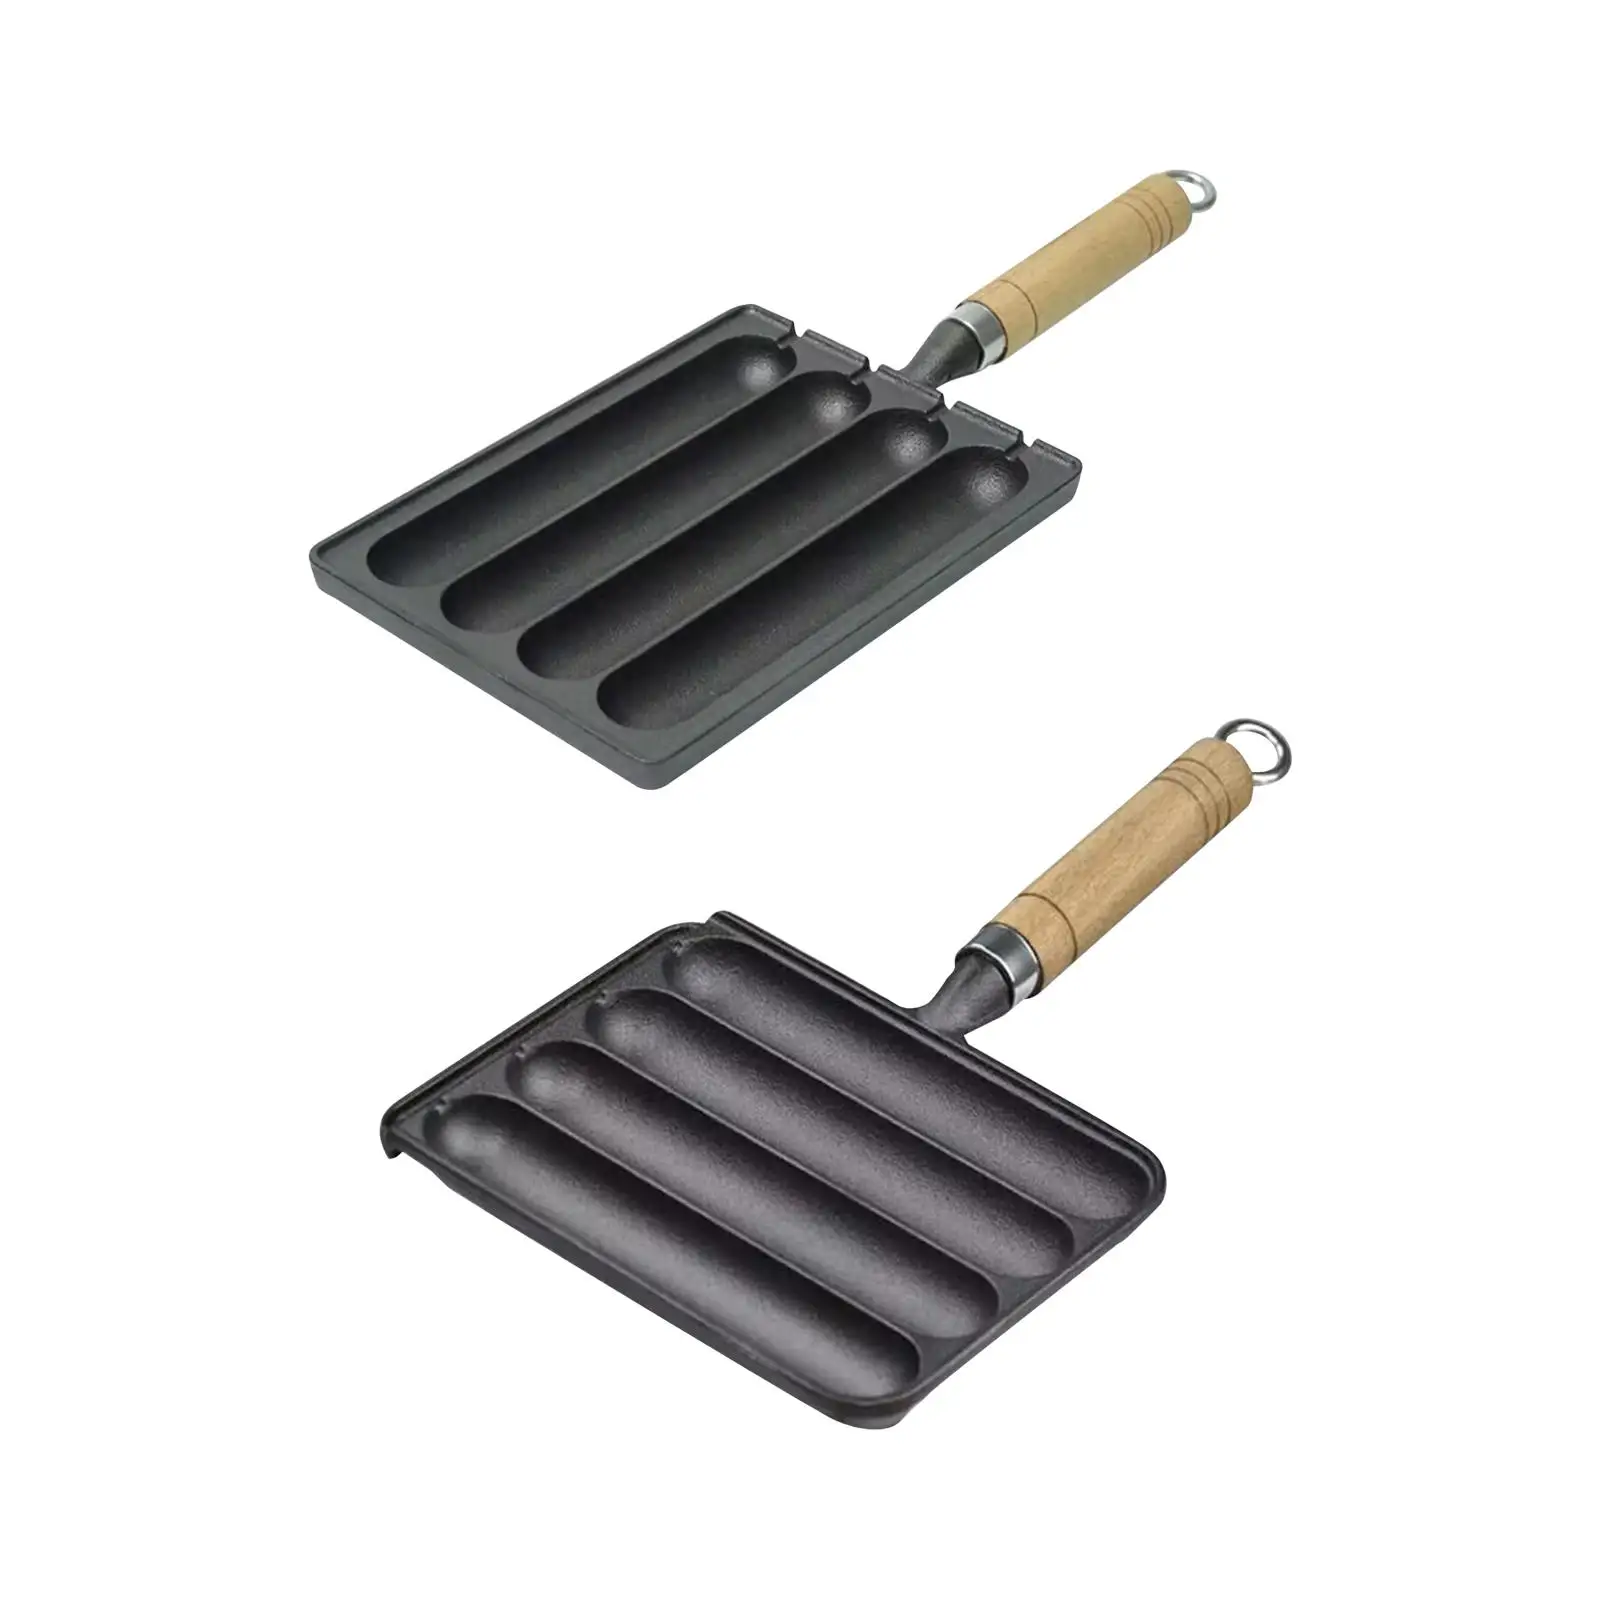 Sausage Grilling Pan Wooden Handle Nonstick DIY Homemade Hot Dog Grill Pan Corn Dog Grill Pan for BBQ Breakfast Outdoor Baking